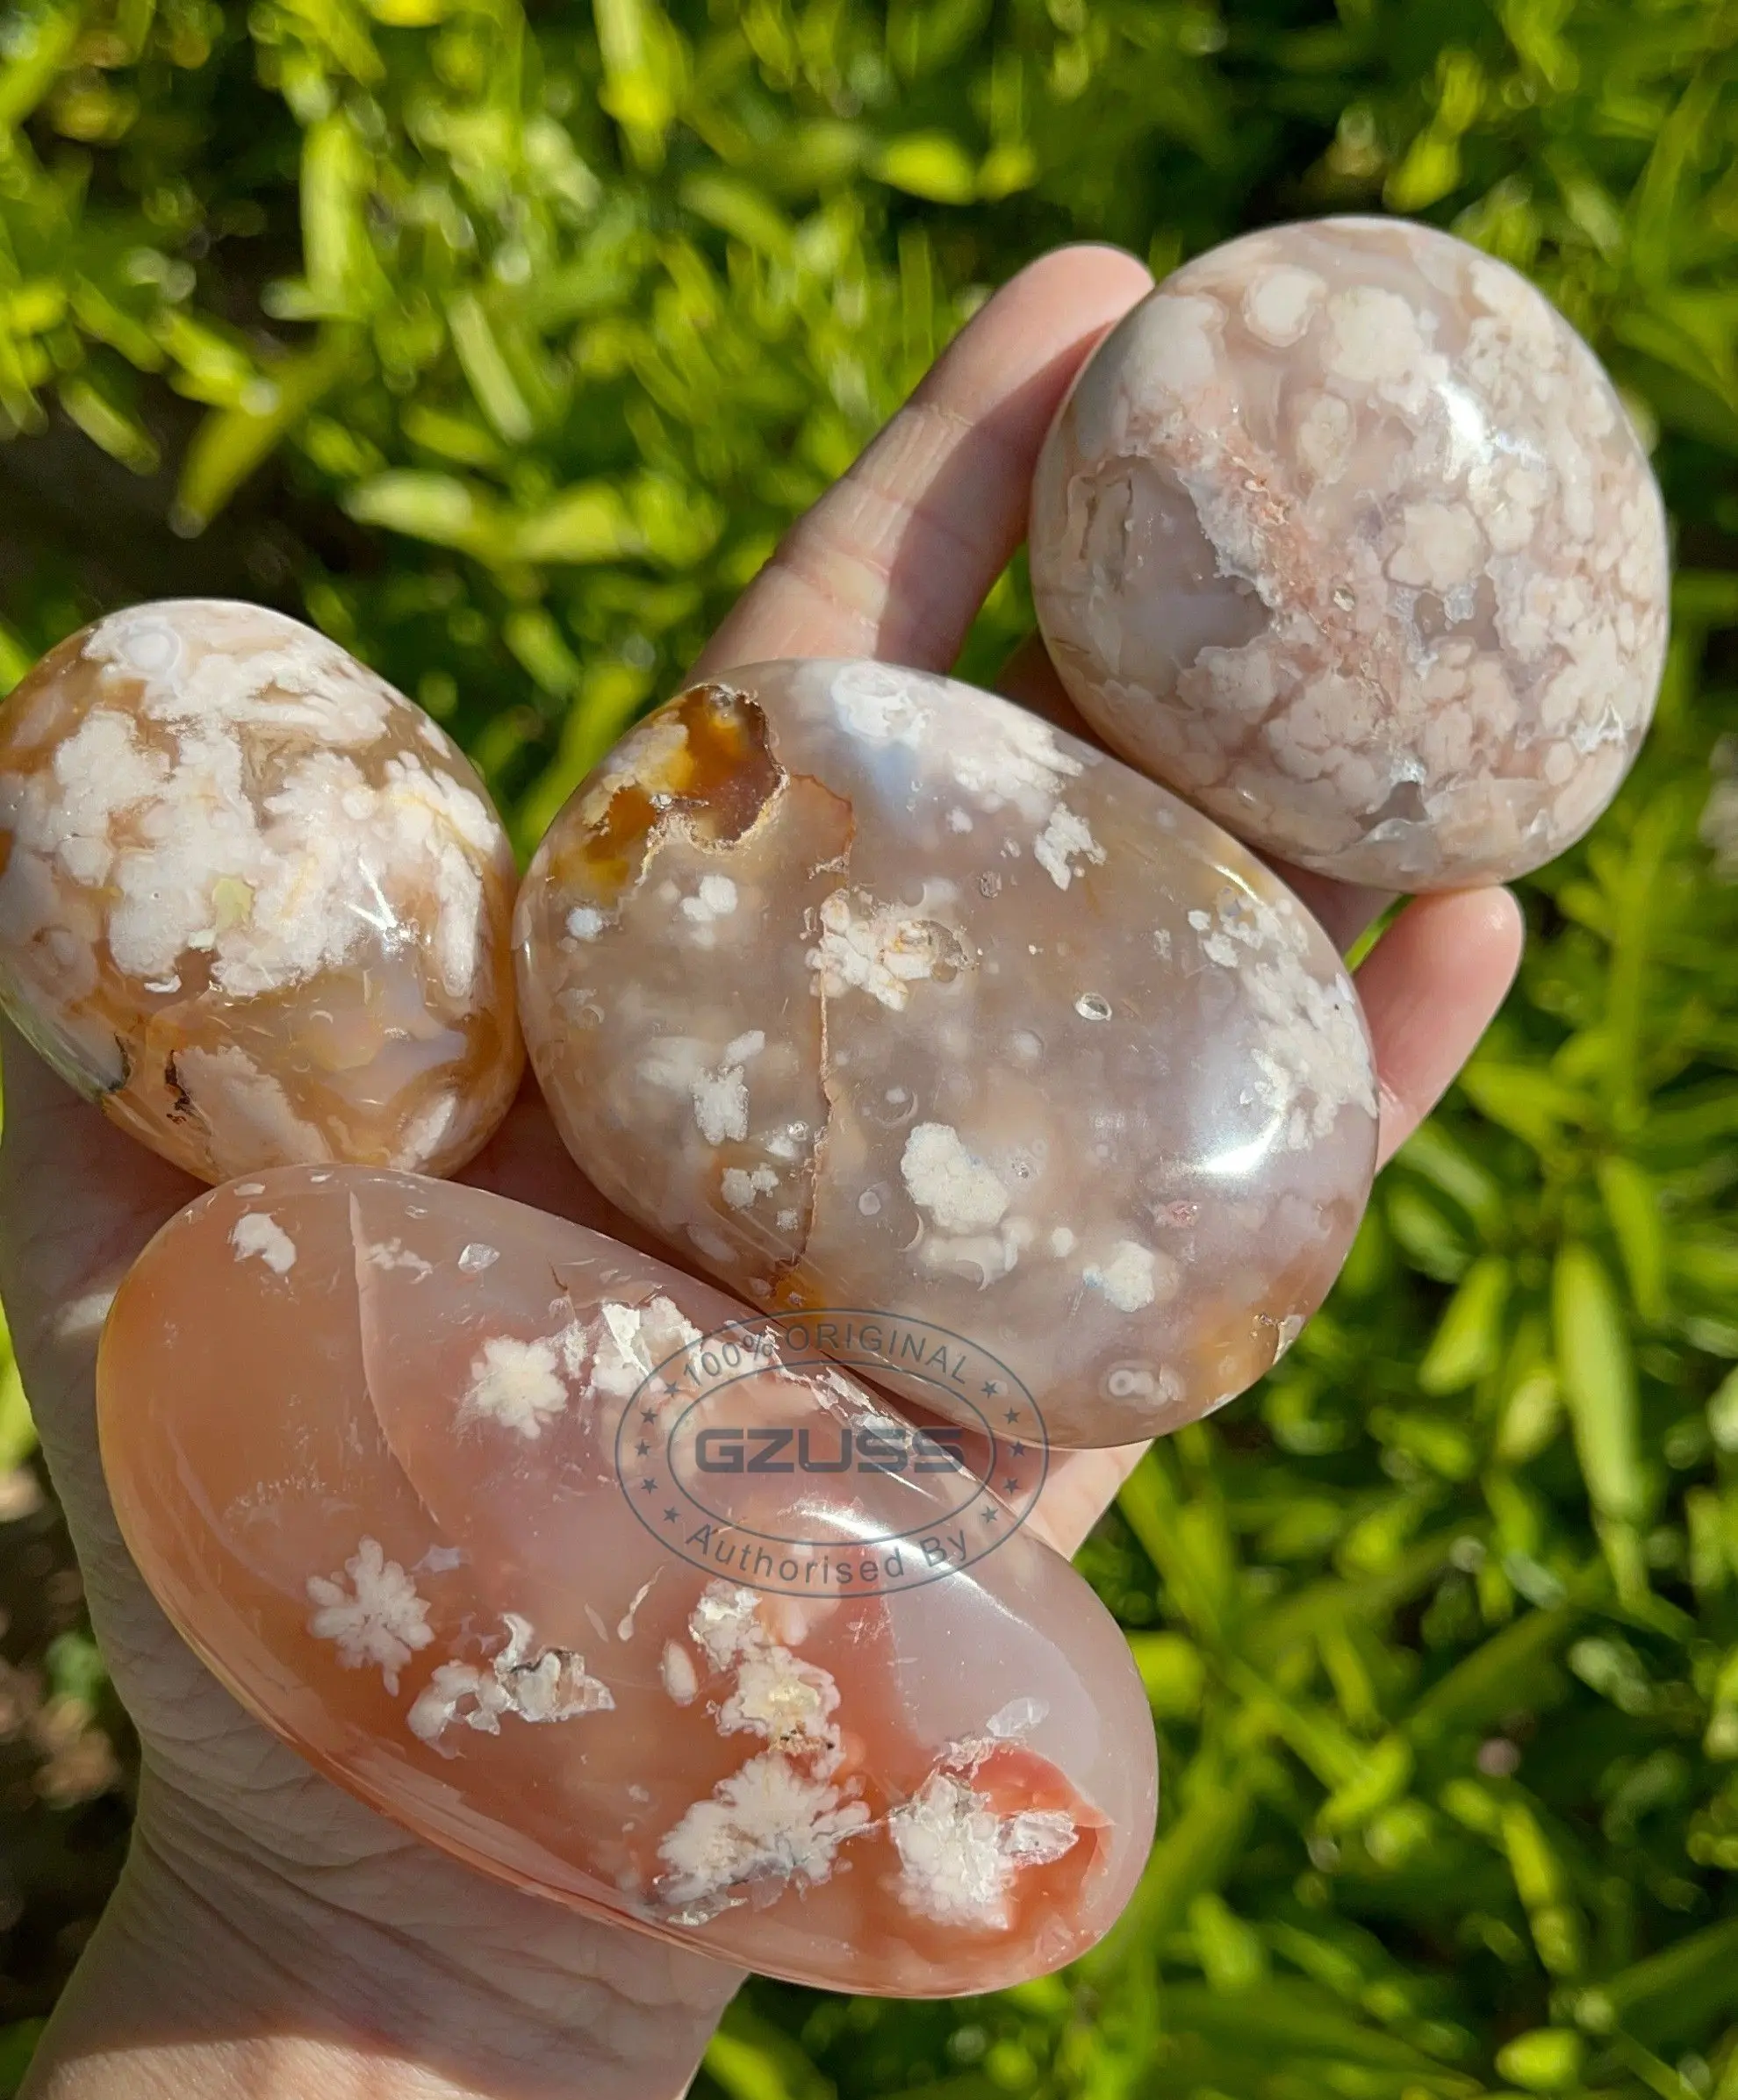 Polished Dozens of Flower Agate Crystal Palm Stones to Choose From